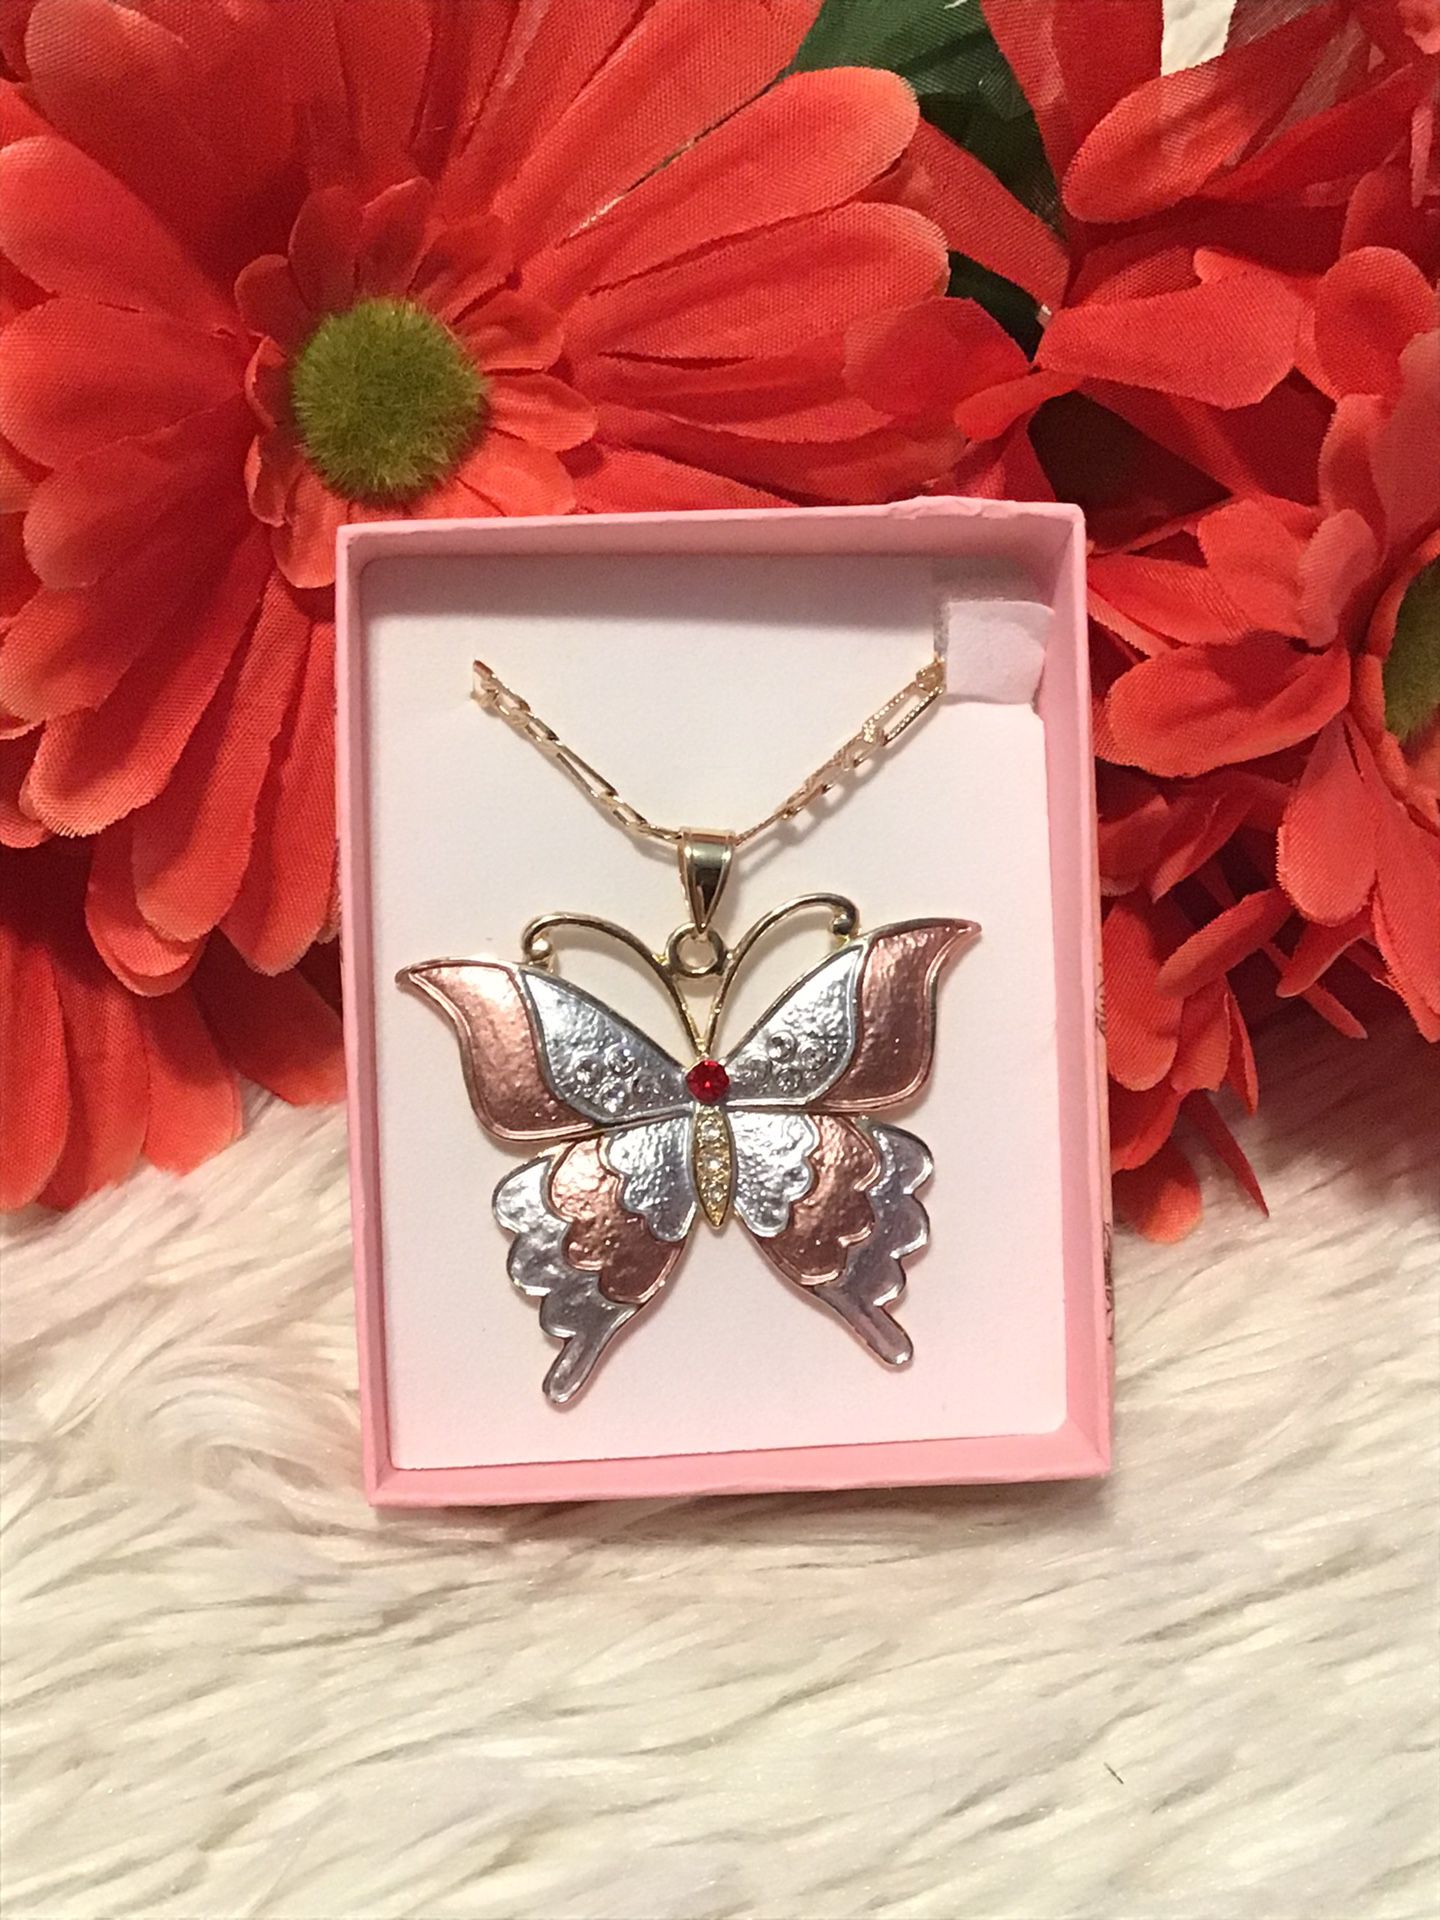 Gorgeous Laminated Gold / Gold Plated  Butterfly Charm Necklace $18